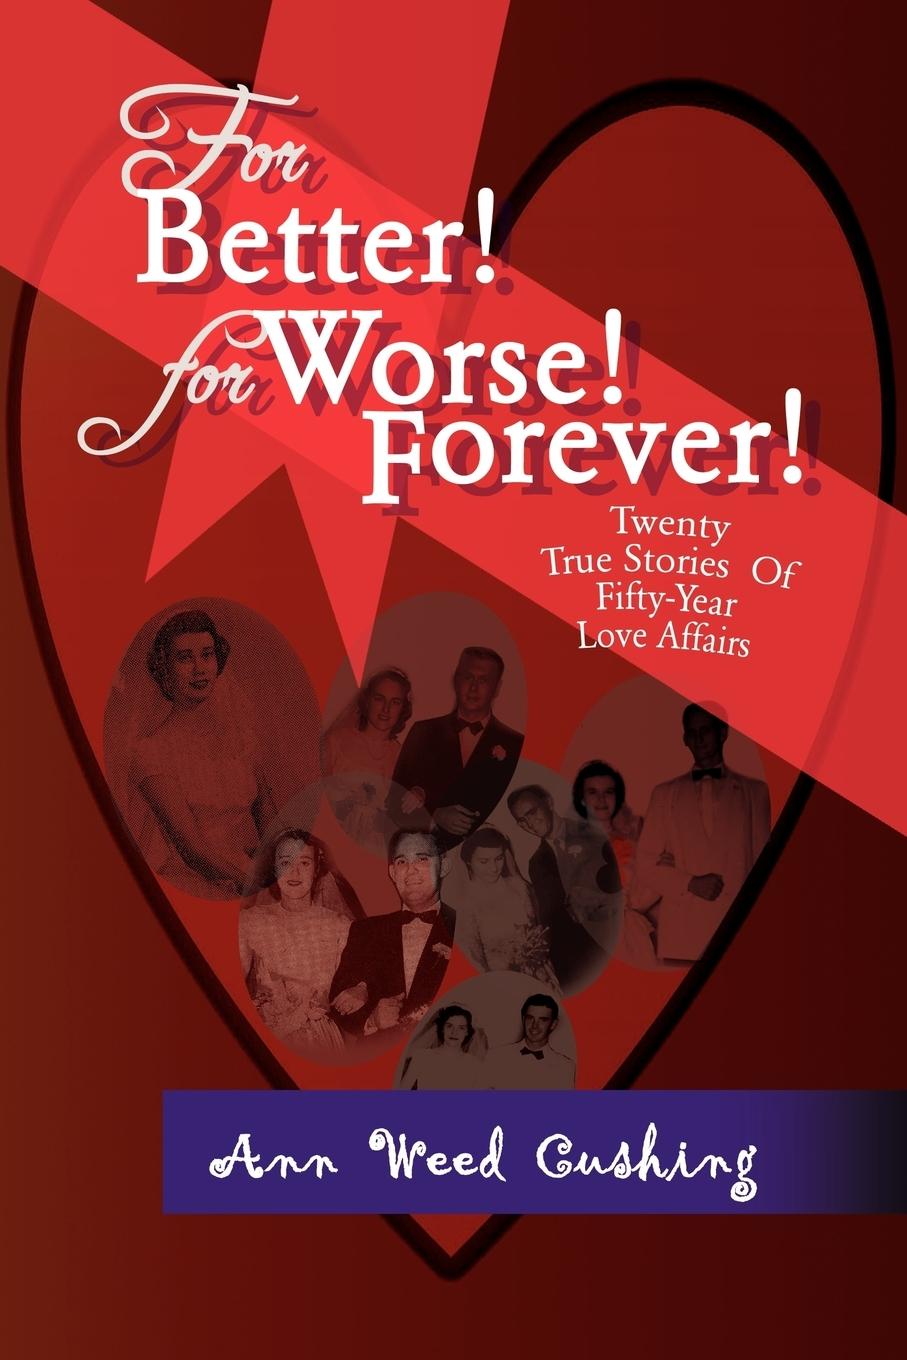 For Better! for Worse! Forever! - Cushing, Ann Weed